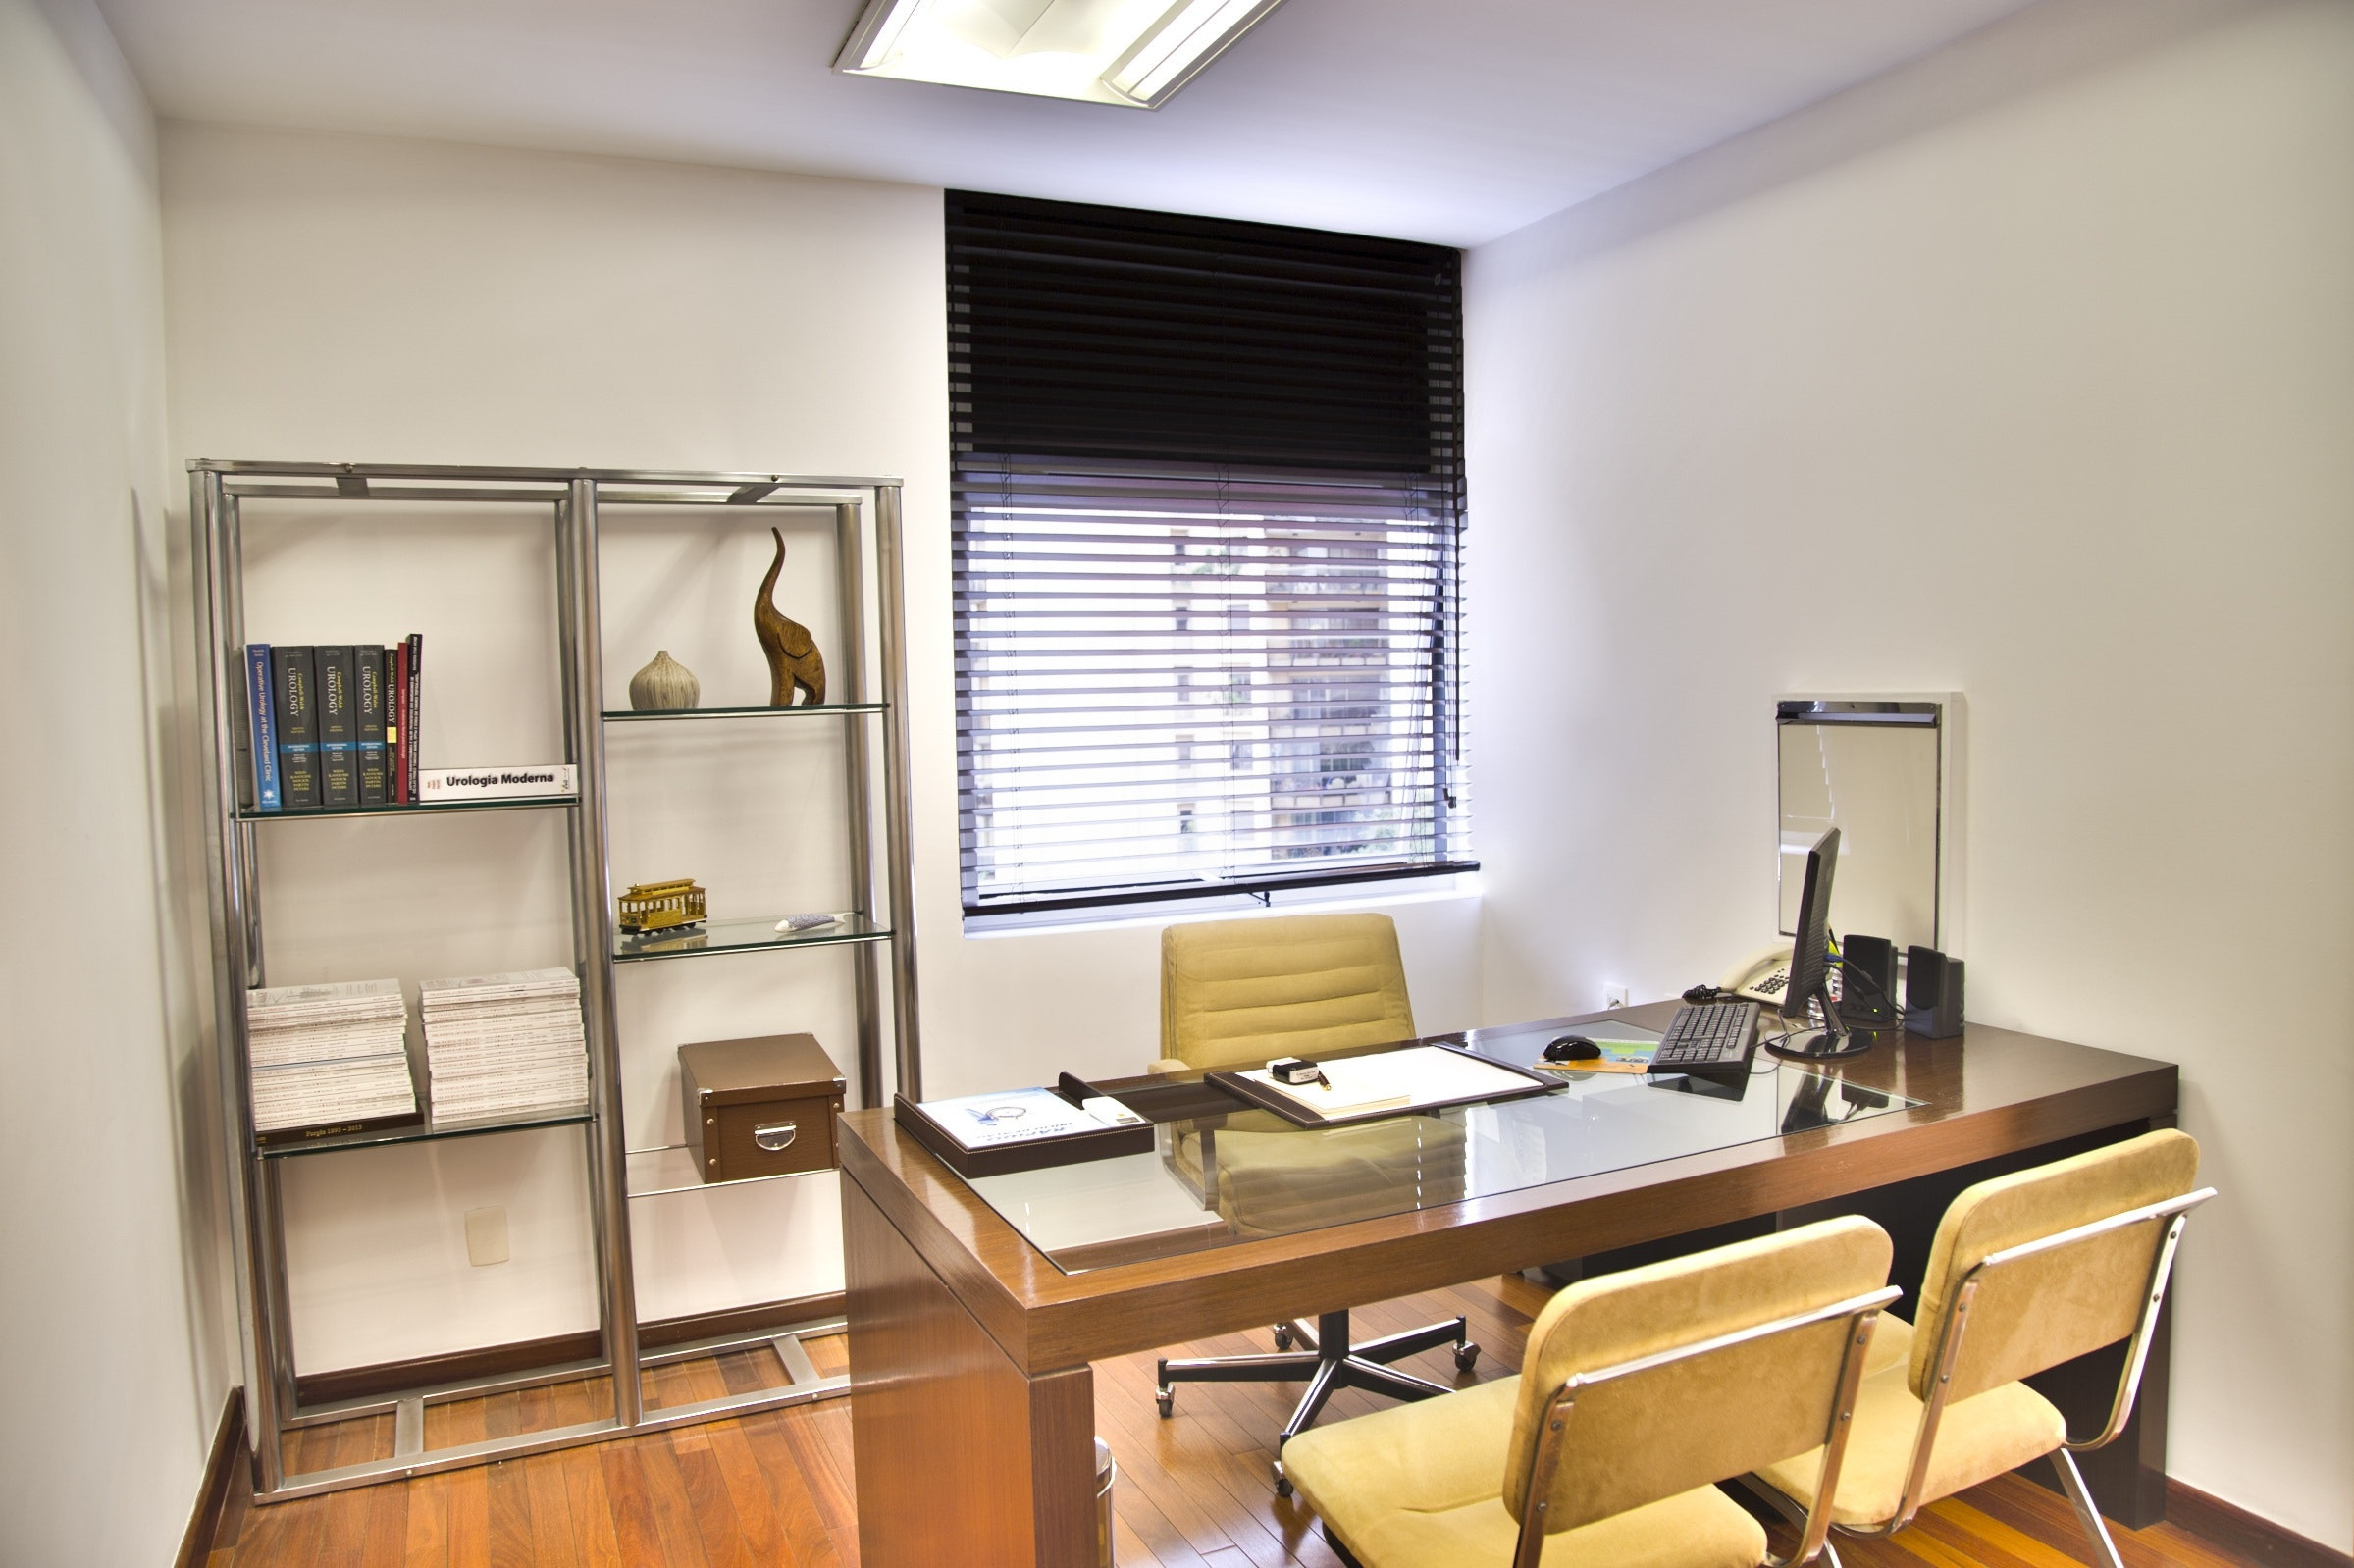 11 Marla Office For Sale In Clifton